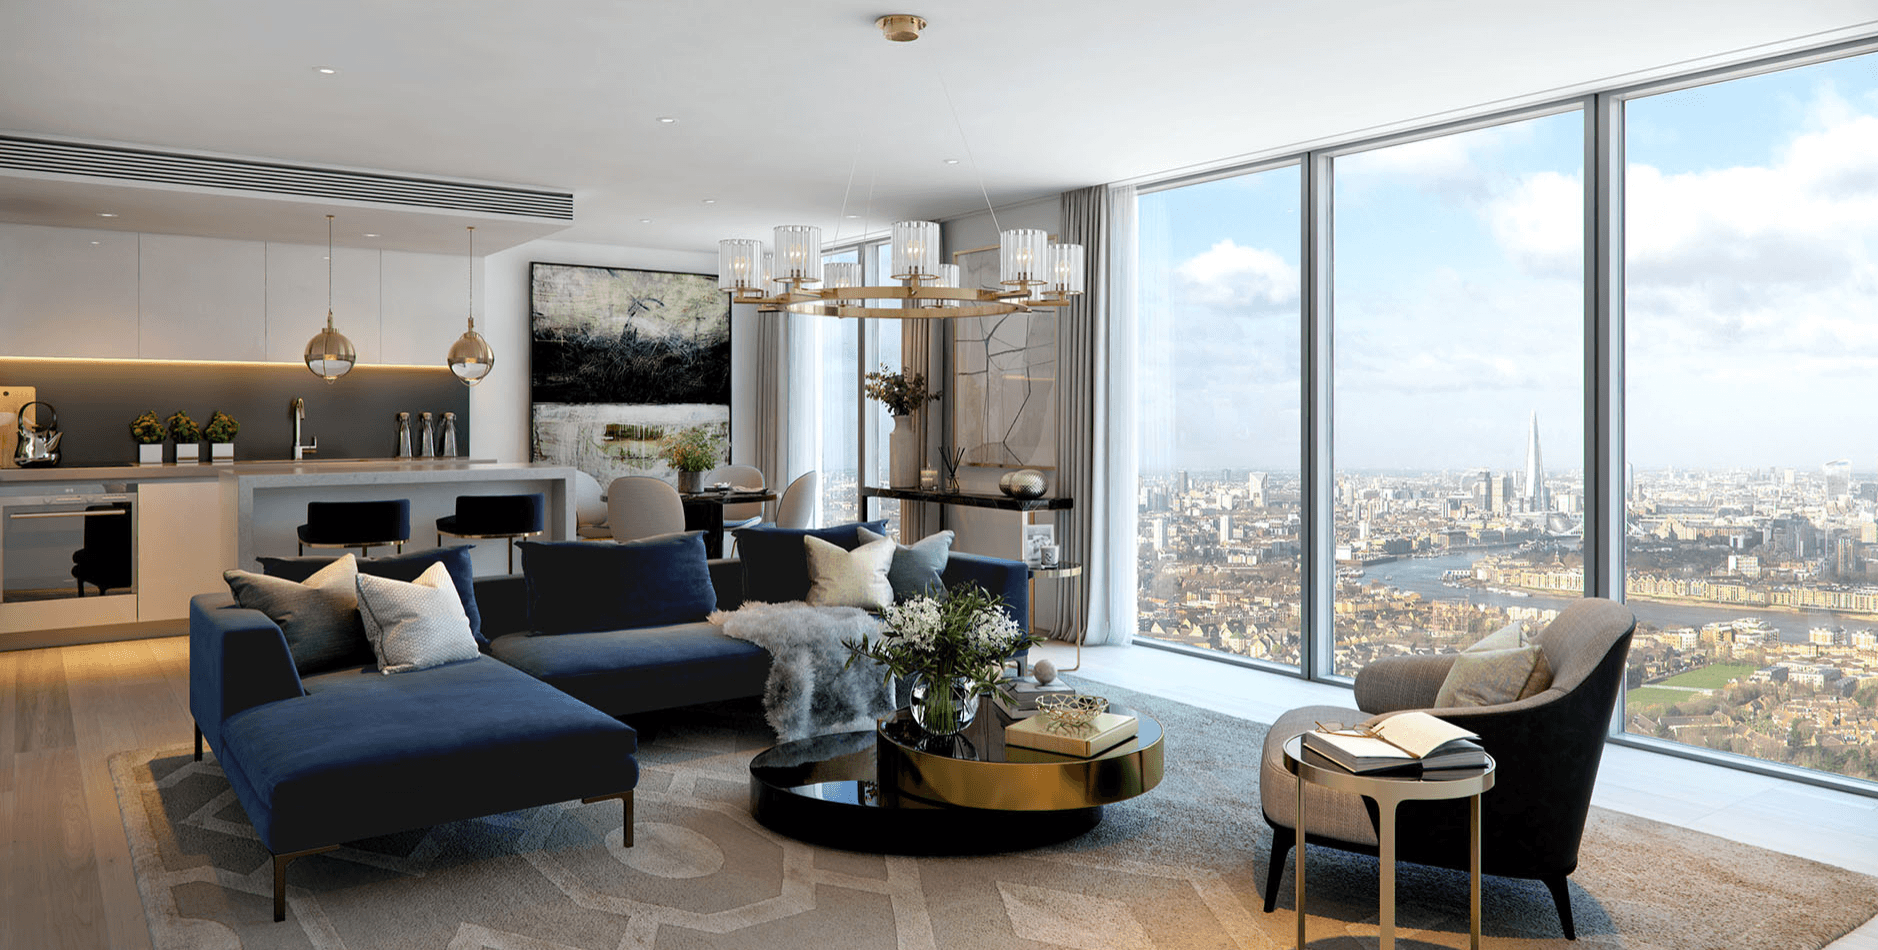 Spectacular residents only roof terrace at level 75 offers unparalleled panoramic views across London. Apartment includes a Winter Garden with Astonishing Views.